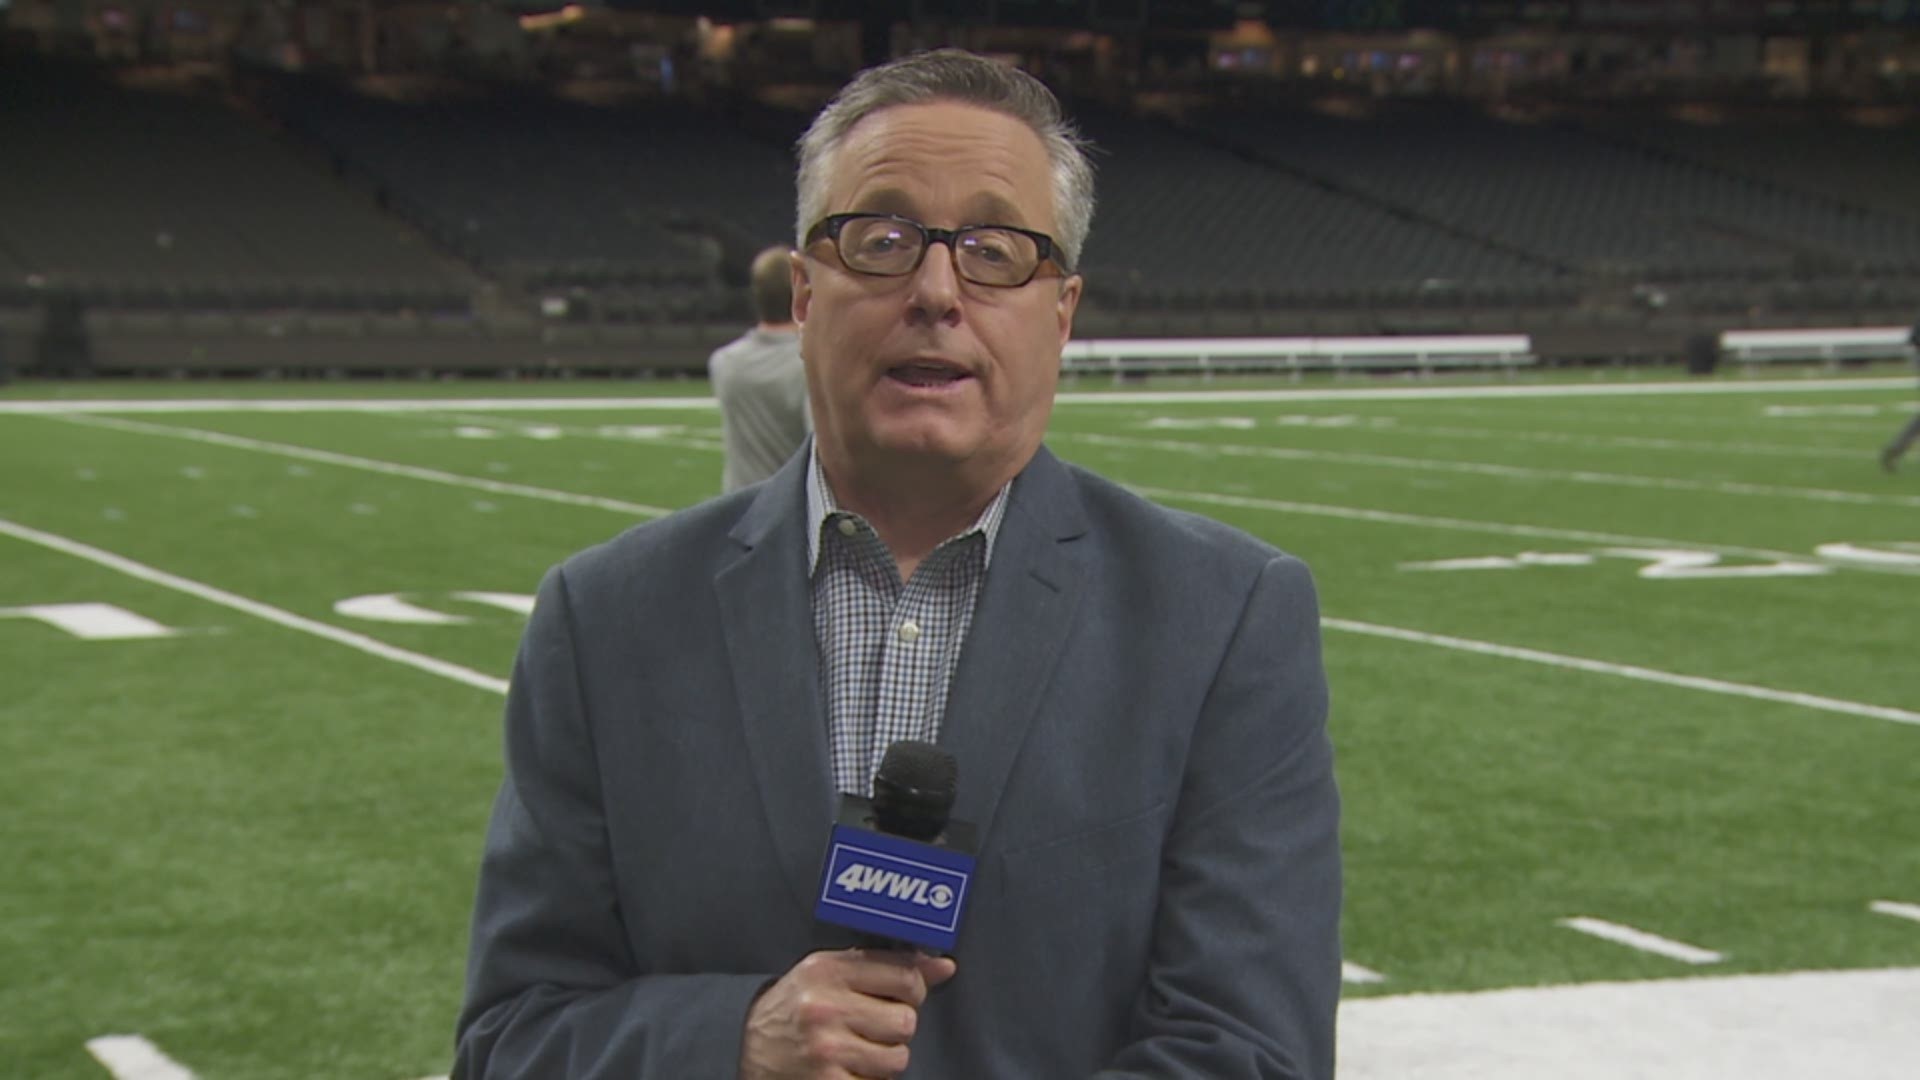 WWL-TV's Doug Mouton and Ricardo LeCompte breakdown what happened in the Superdome Sunday.